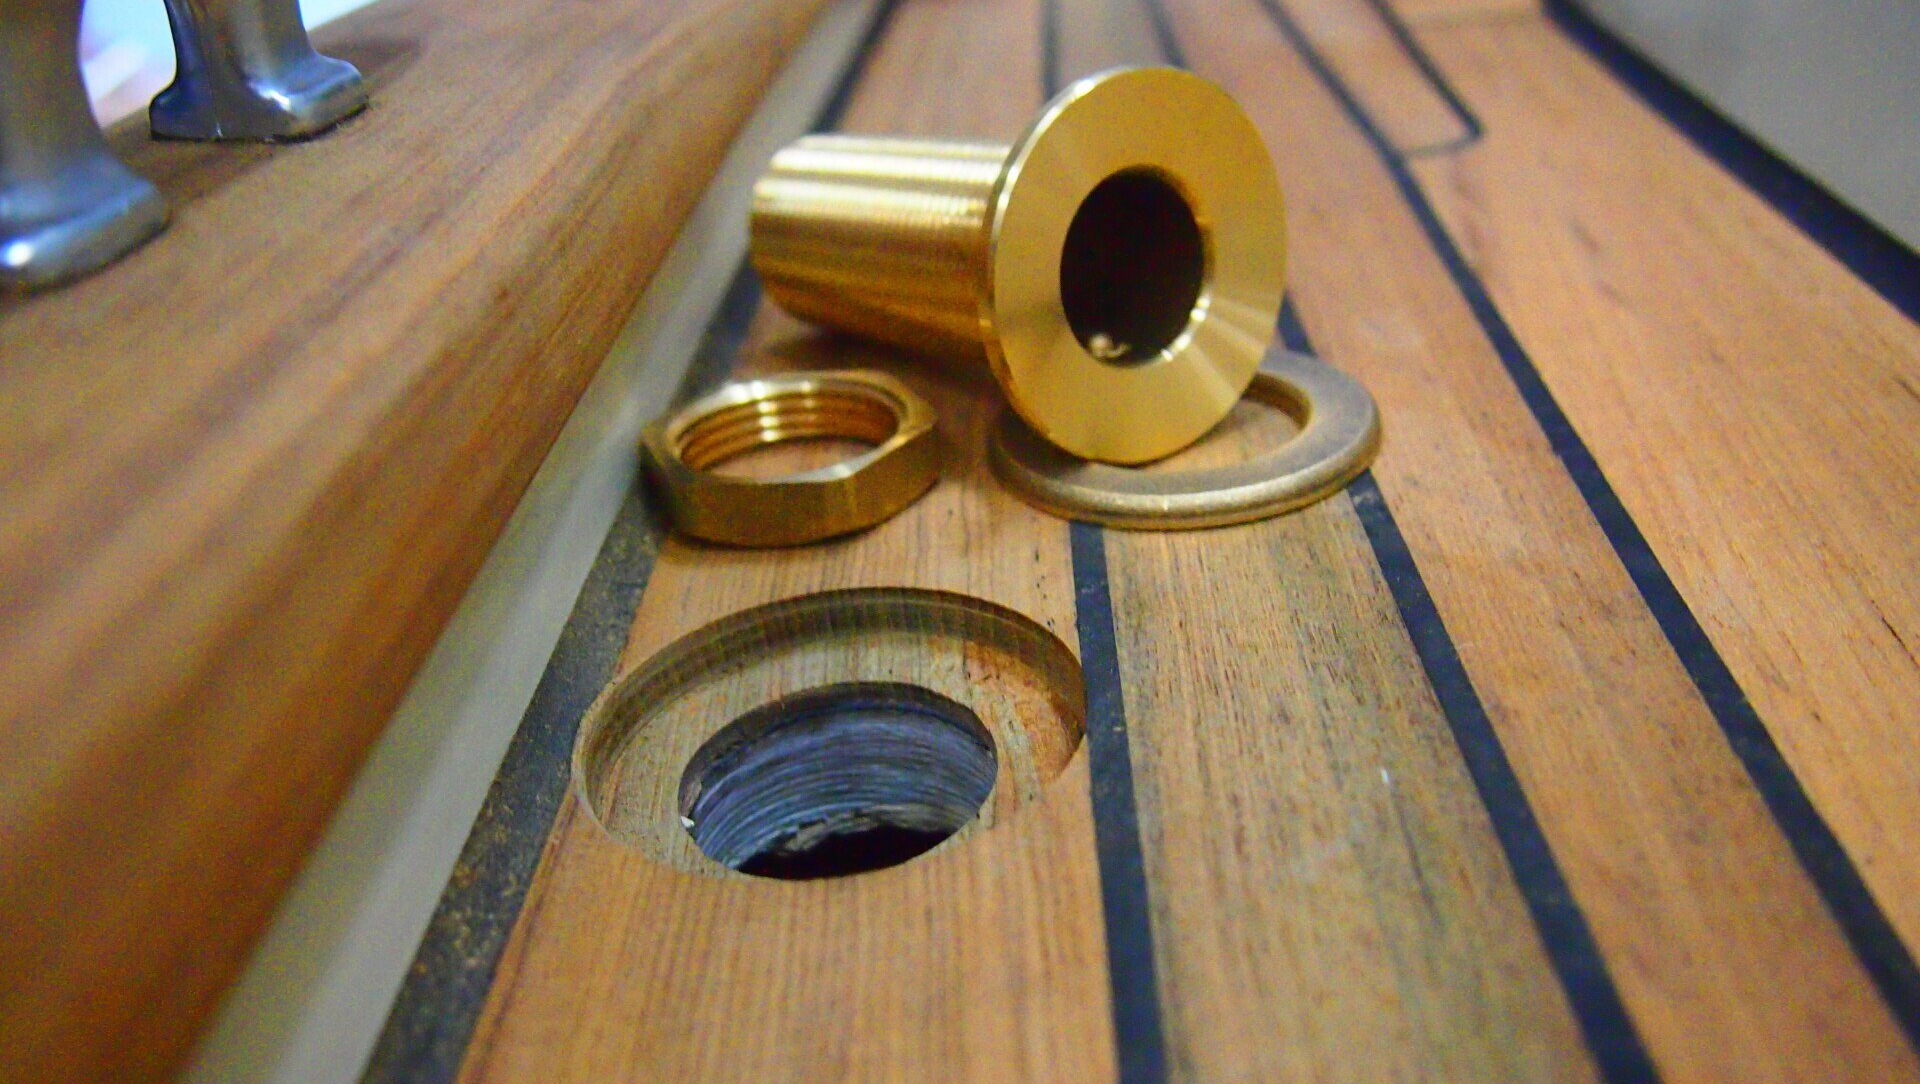 The deck hardware is fitted and screwed in place during a teak decking process by boat building company Mobilerboots